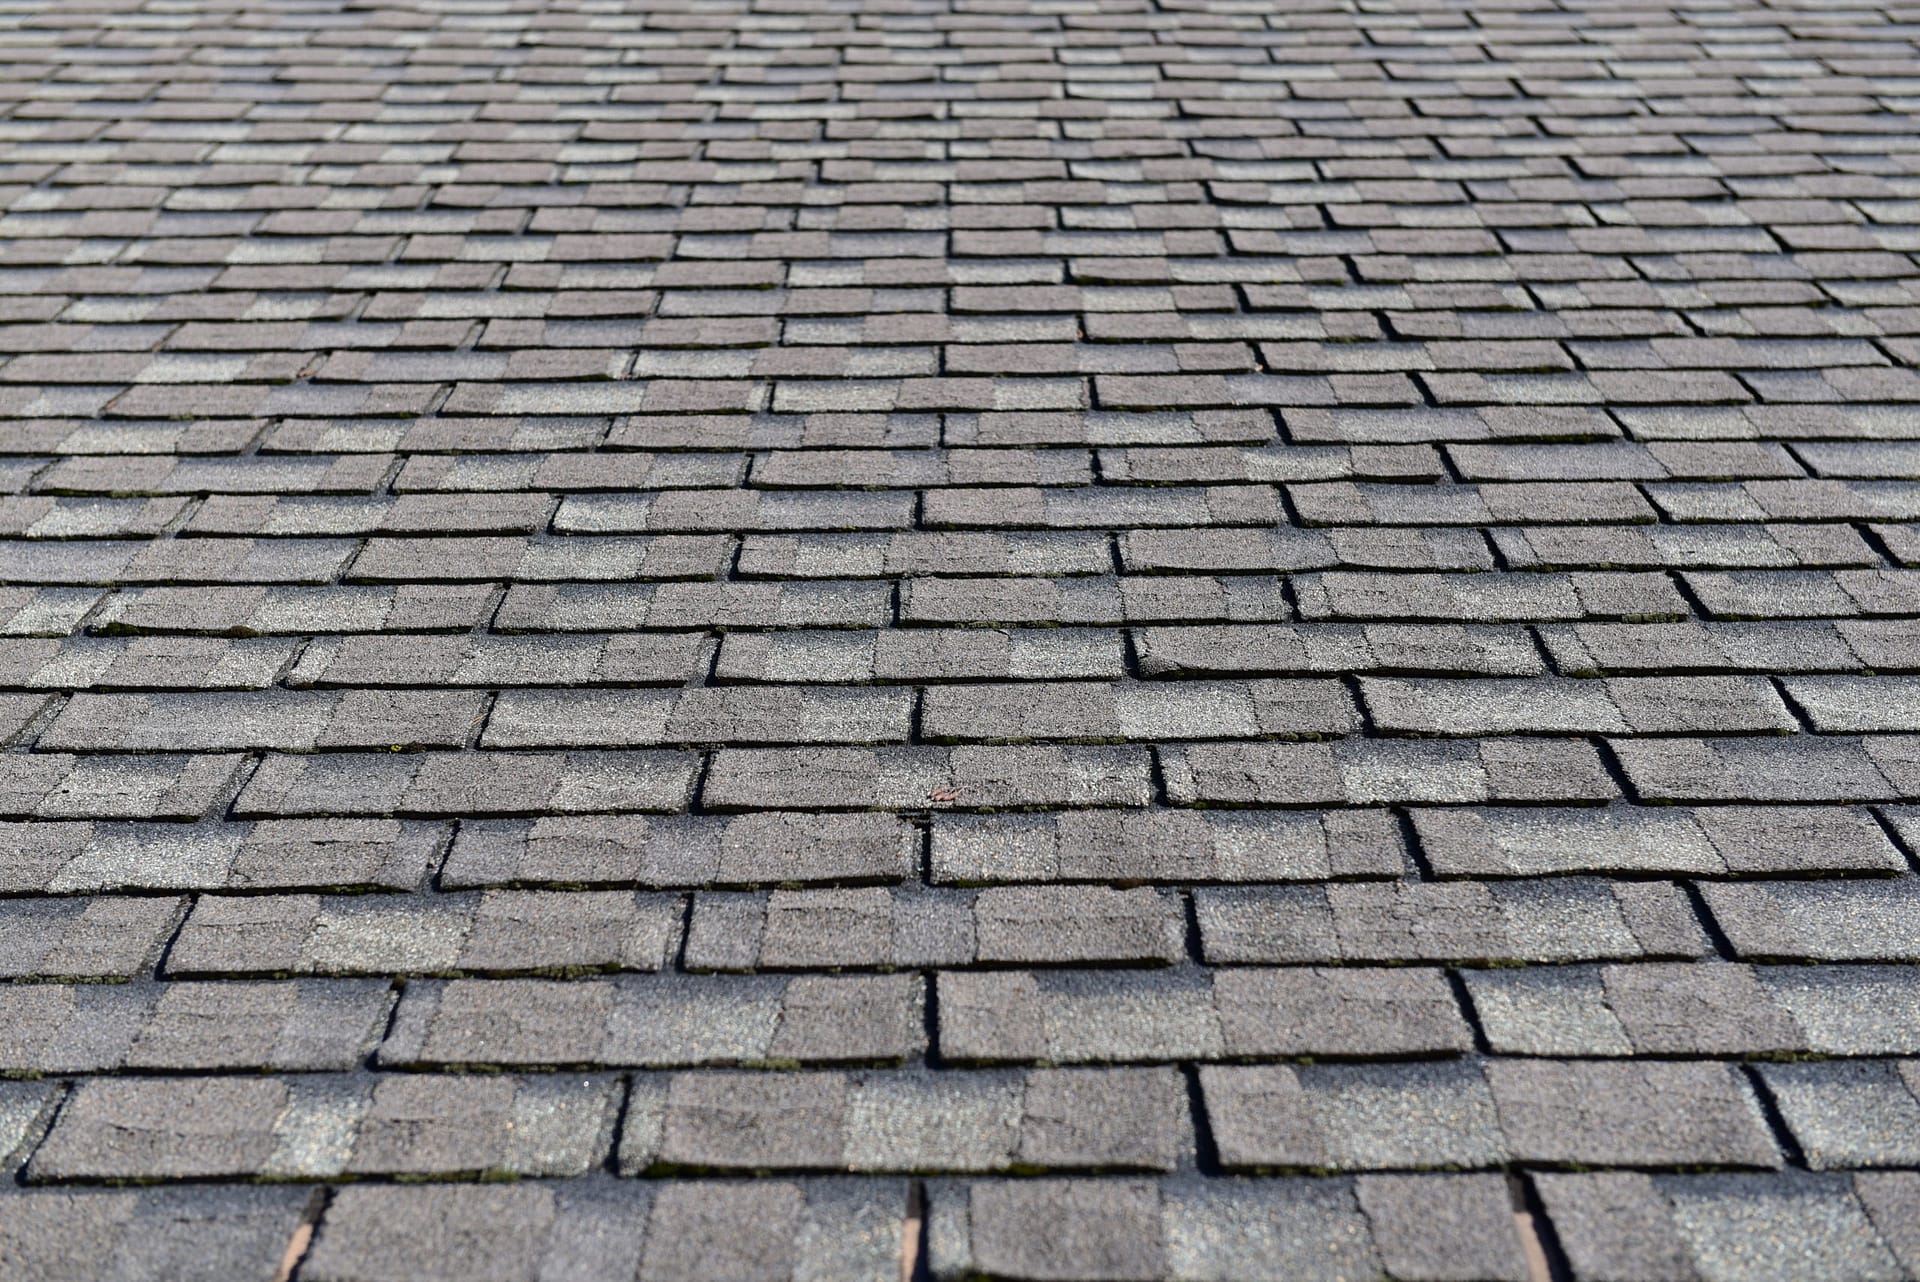 Roofing surface. Shingles.